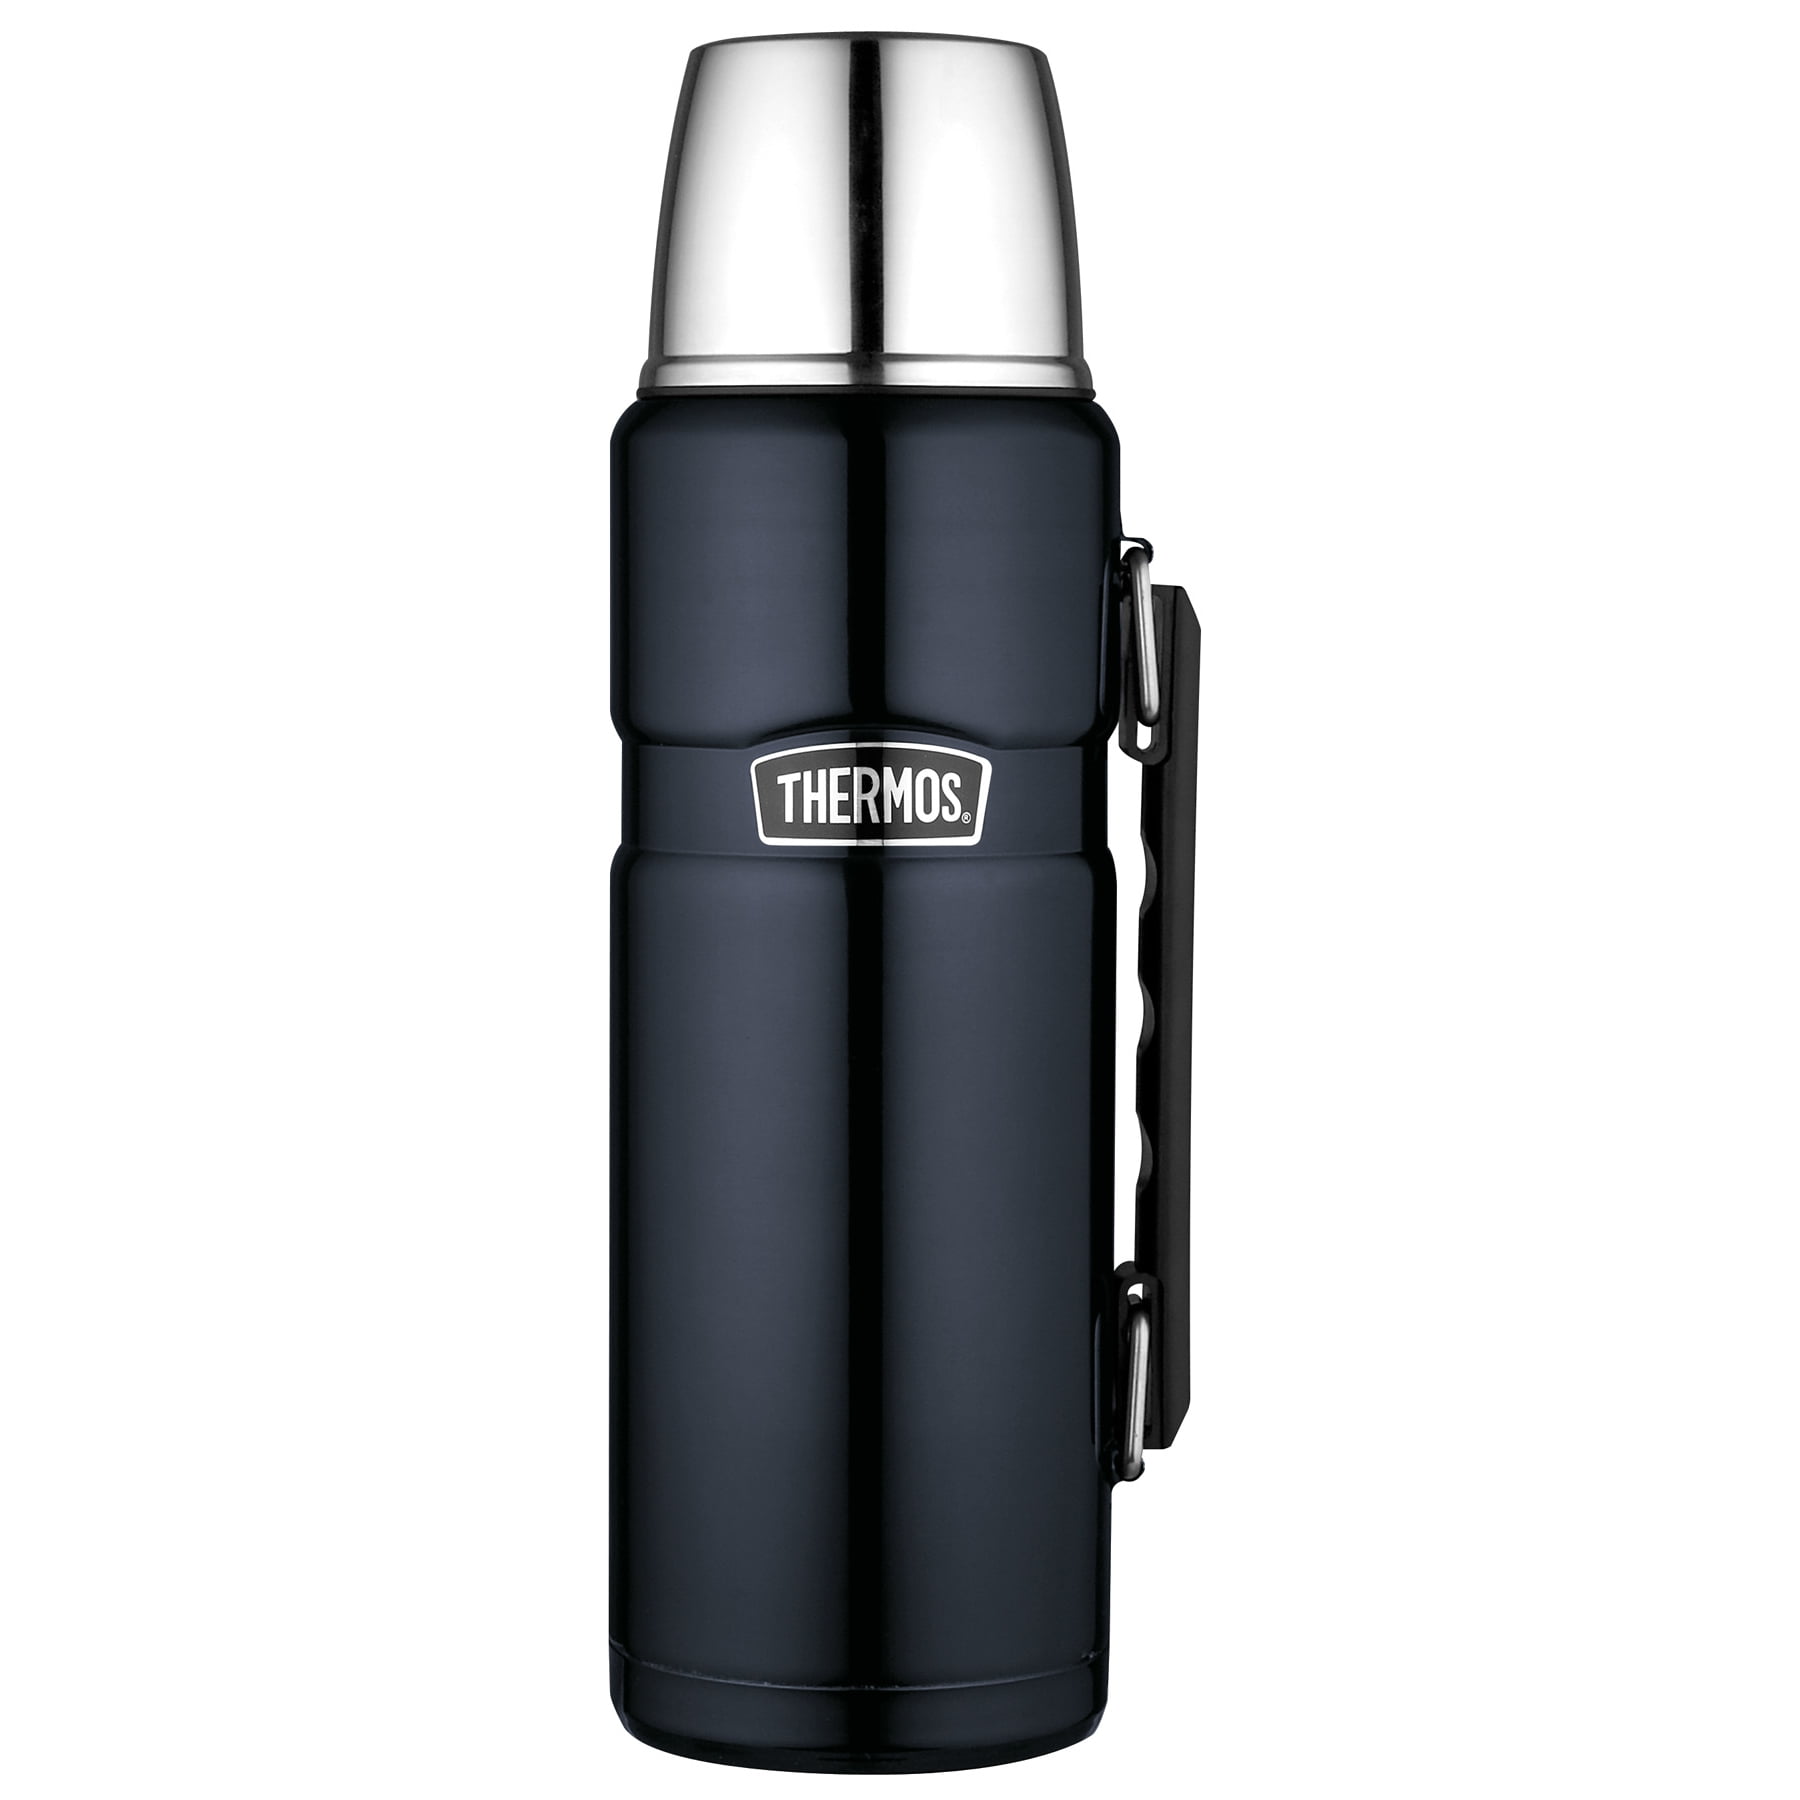 Thermos Stainless Steel King 40-Ounce Beverage Bottles 